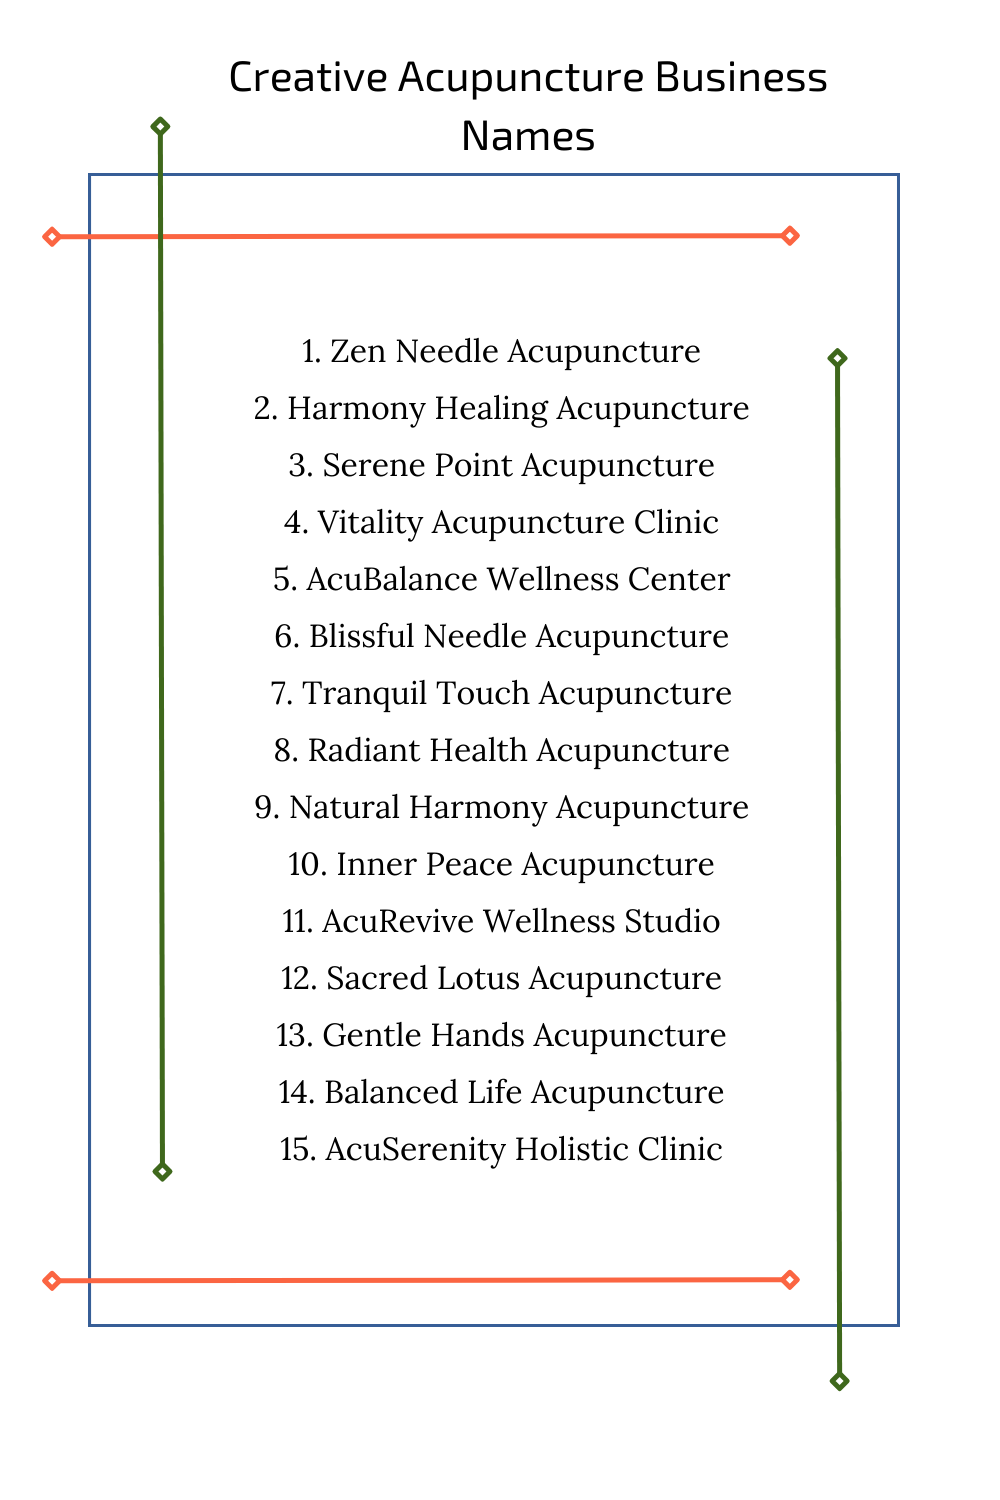 Creative Acupuncture Business Names